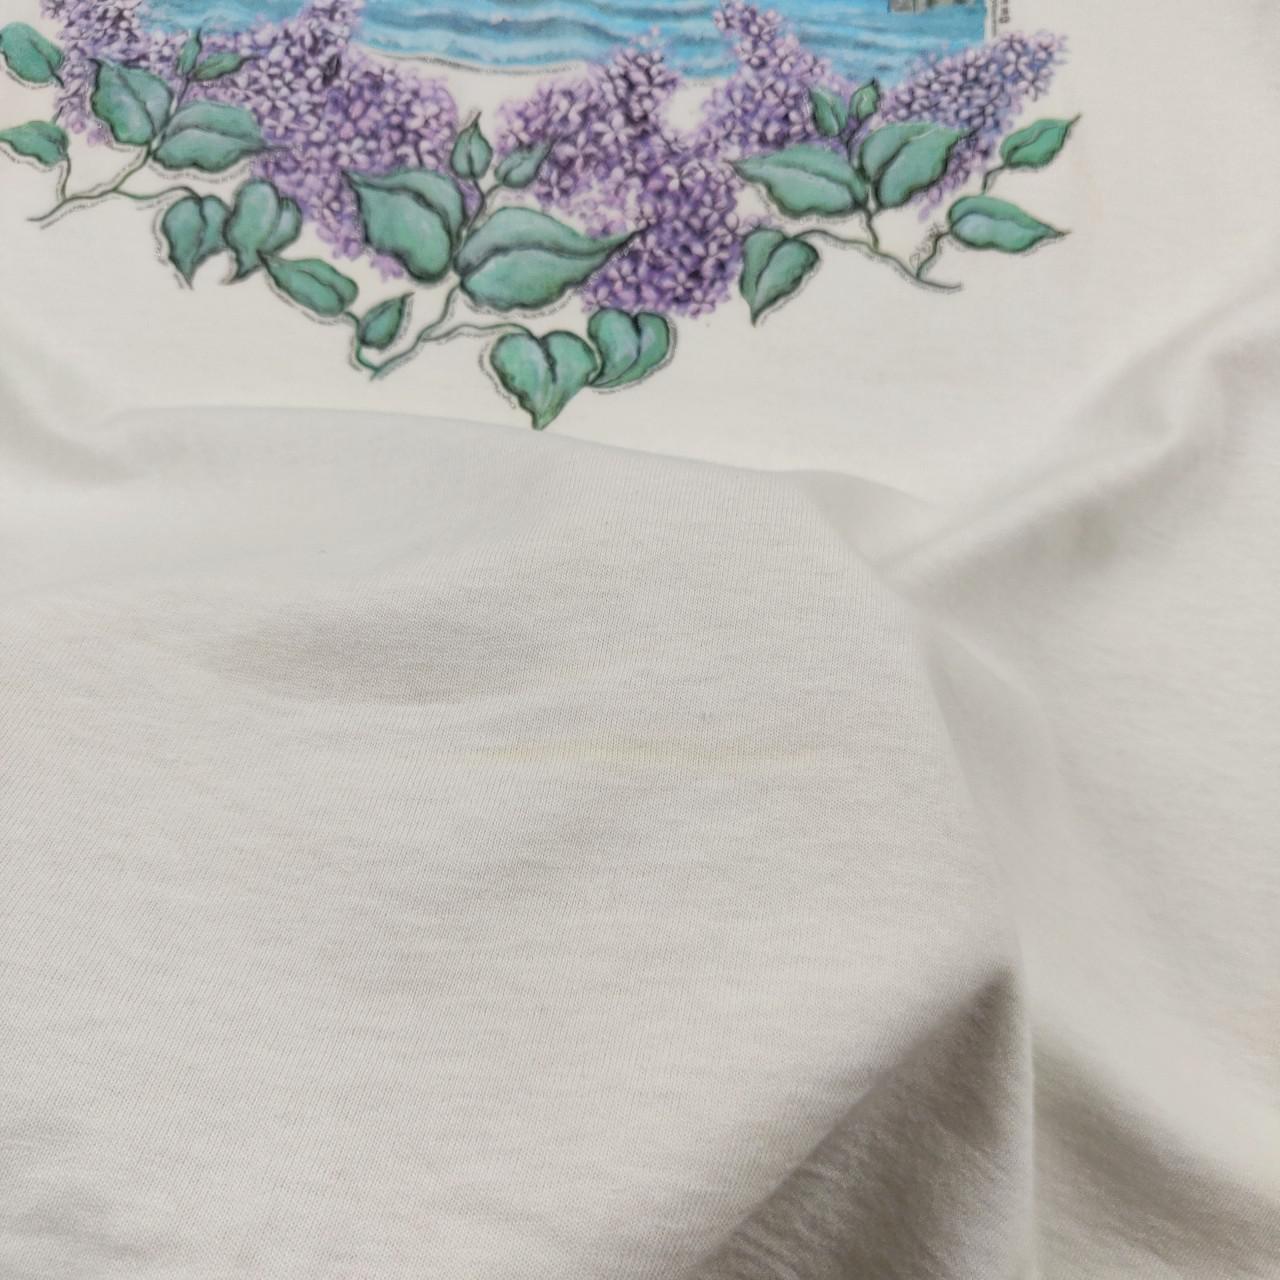 American Vintage Women's White and Purple T-shirt (3)